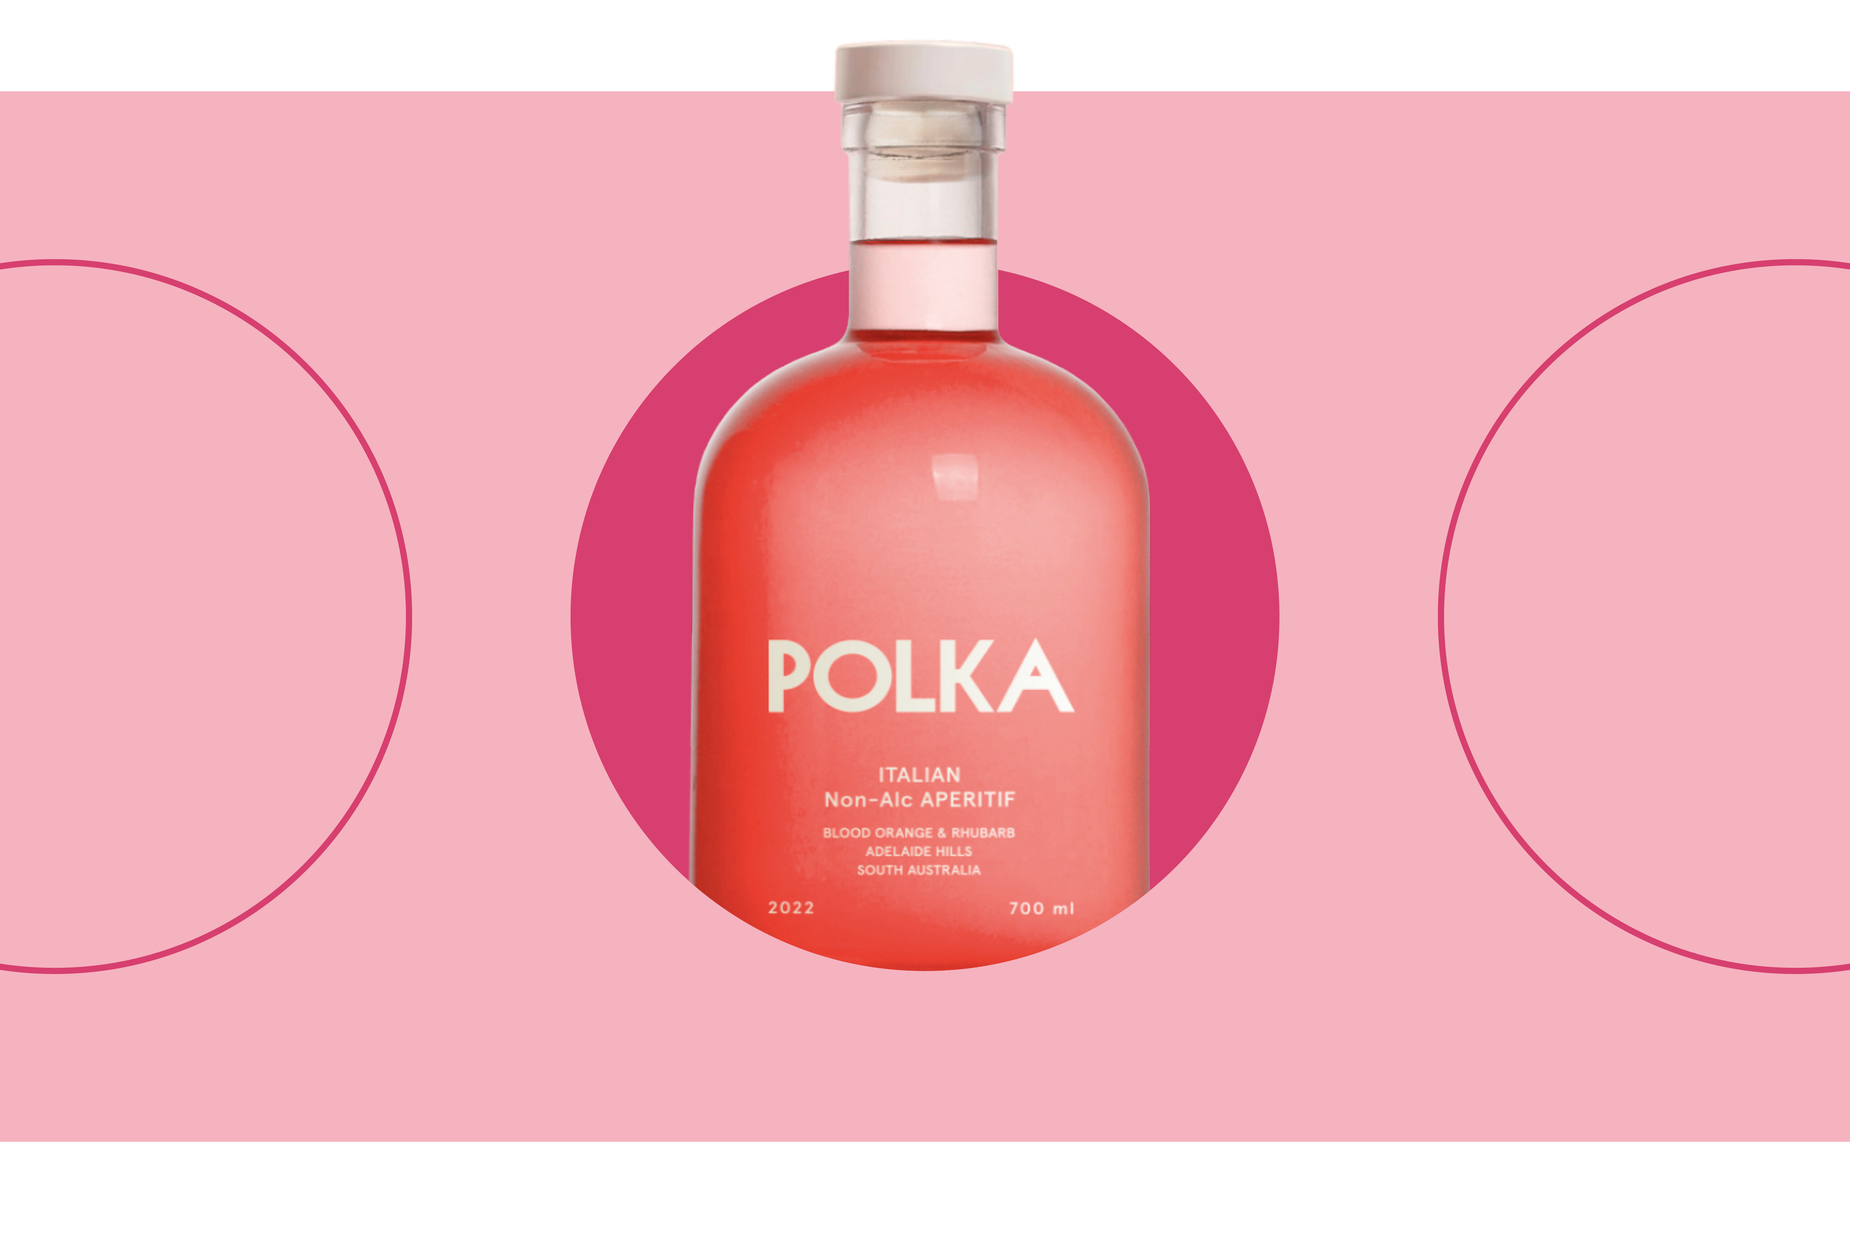 Introducing Polka De-Alc Drinks - The ‘New Wave’ of Alcohol-Free